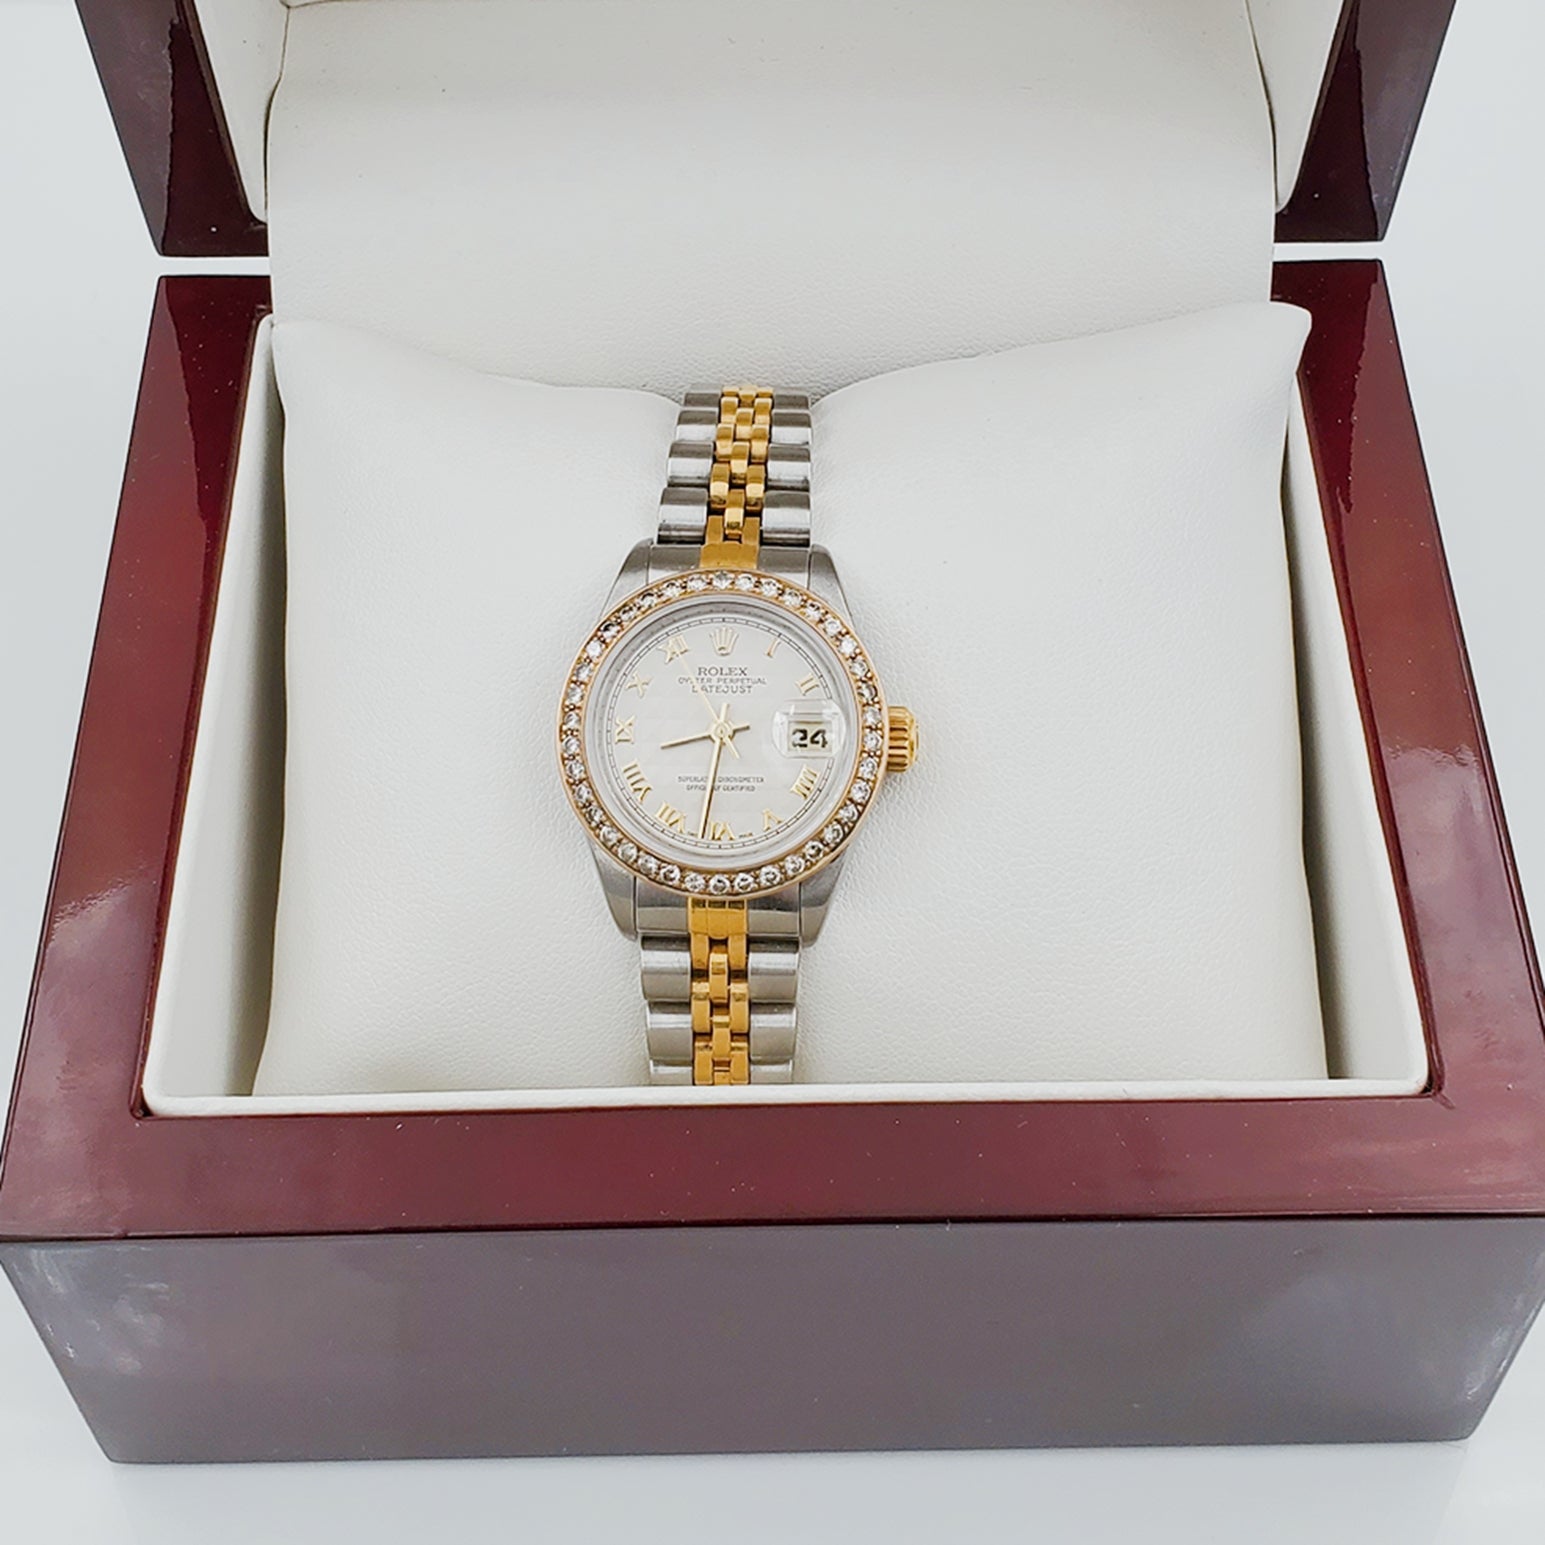 Ladies Rolex 18K Gold Two Tone 26mm DateJust Wristwatch w/ Roman Numerals, Off-White Dial & Diamond Bezel. (Pre-Owned)